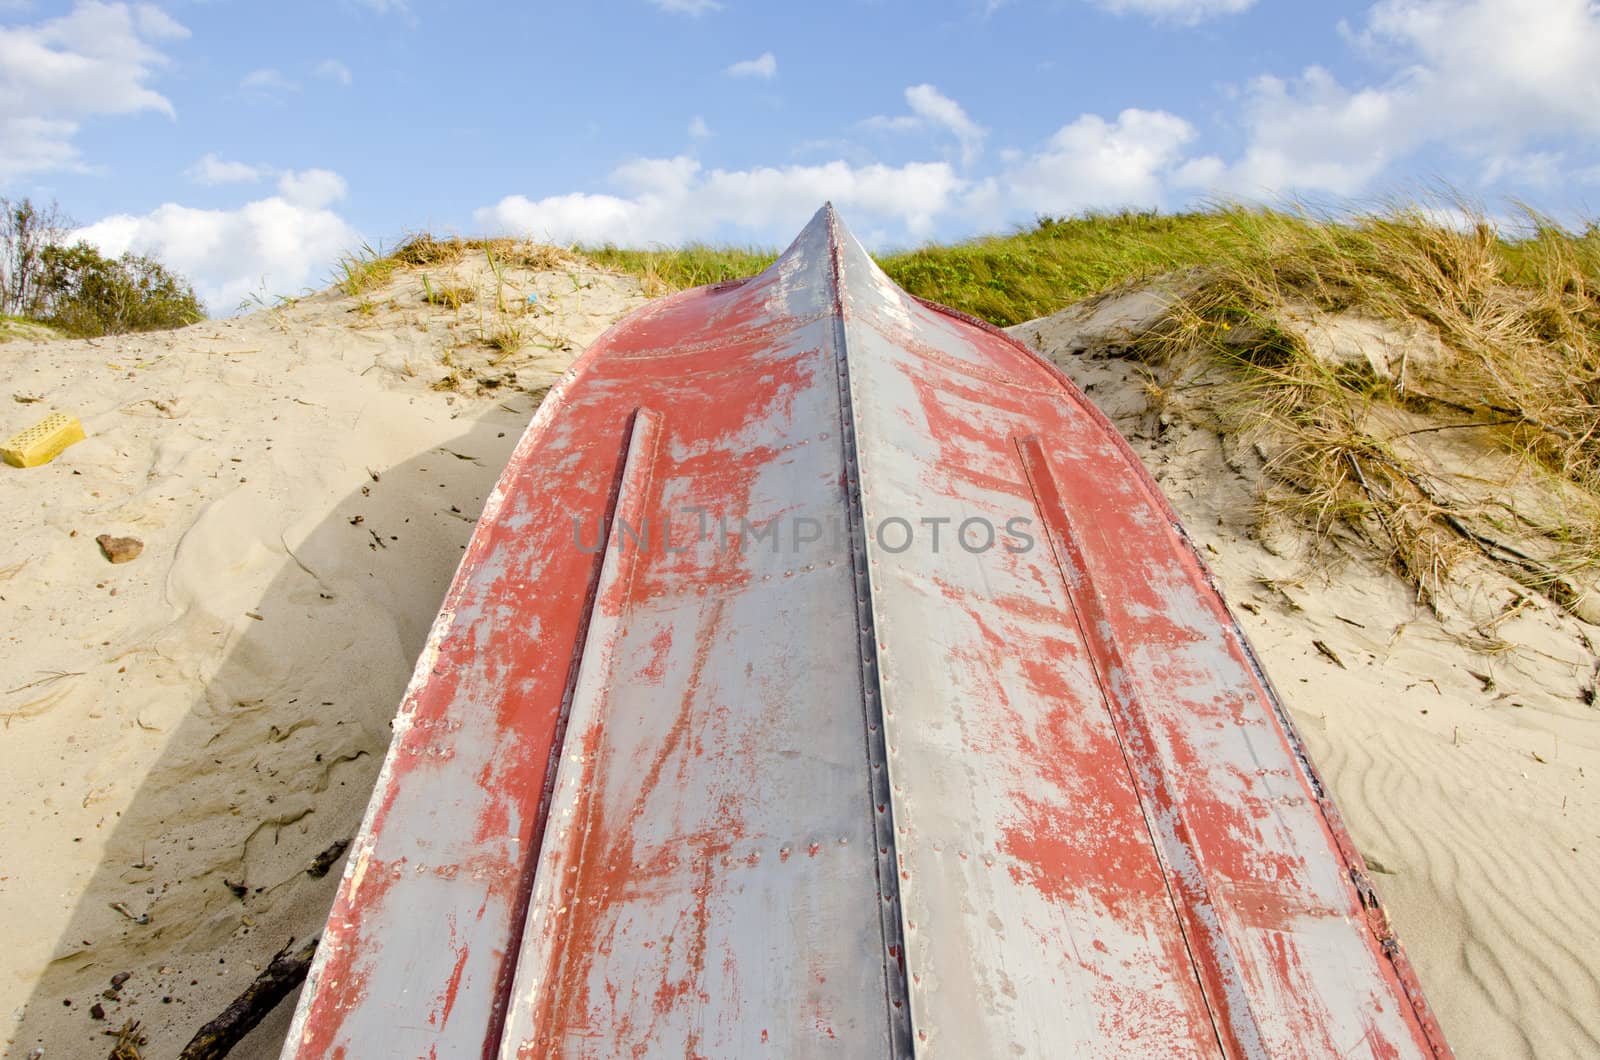 Boat made of tin upside down resting on the dunes. by sauletas